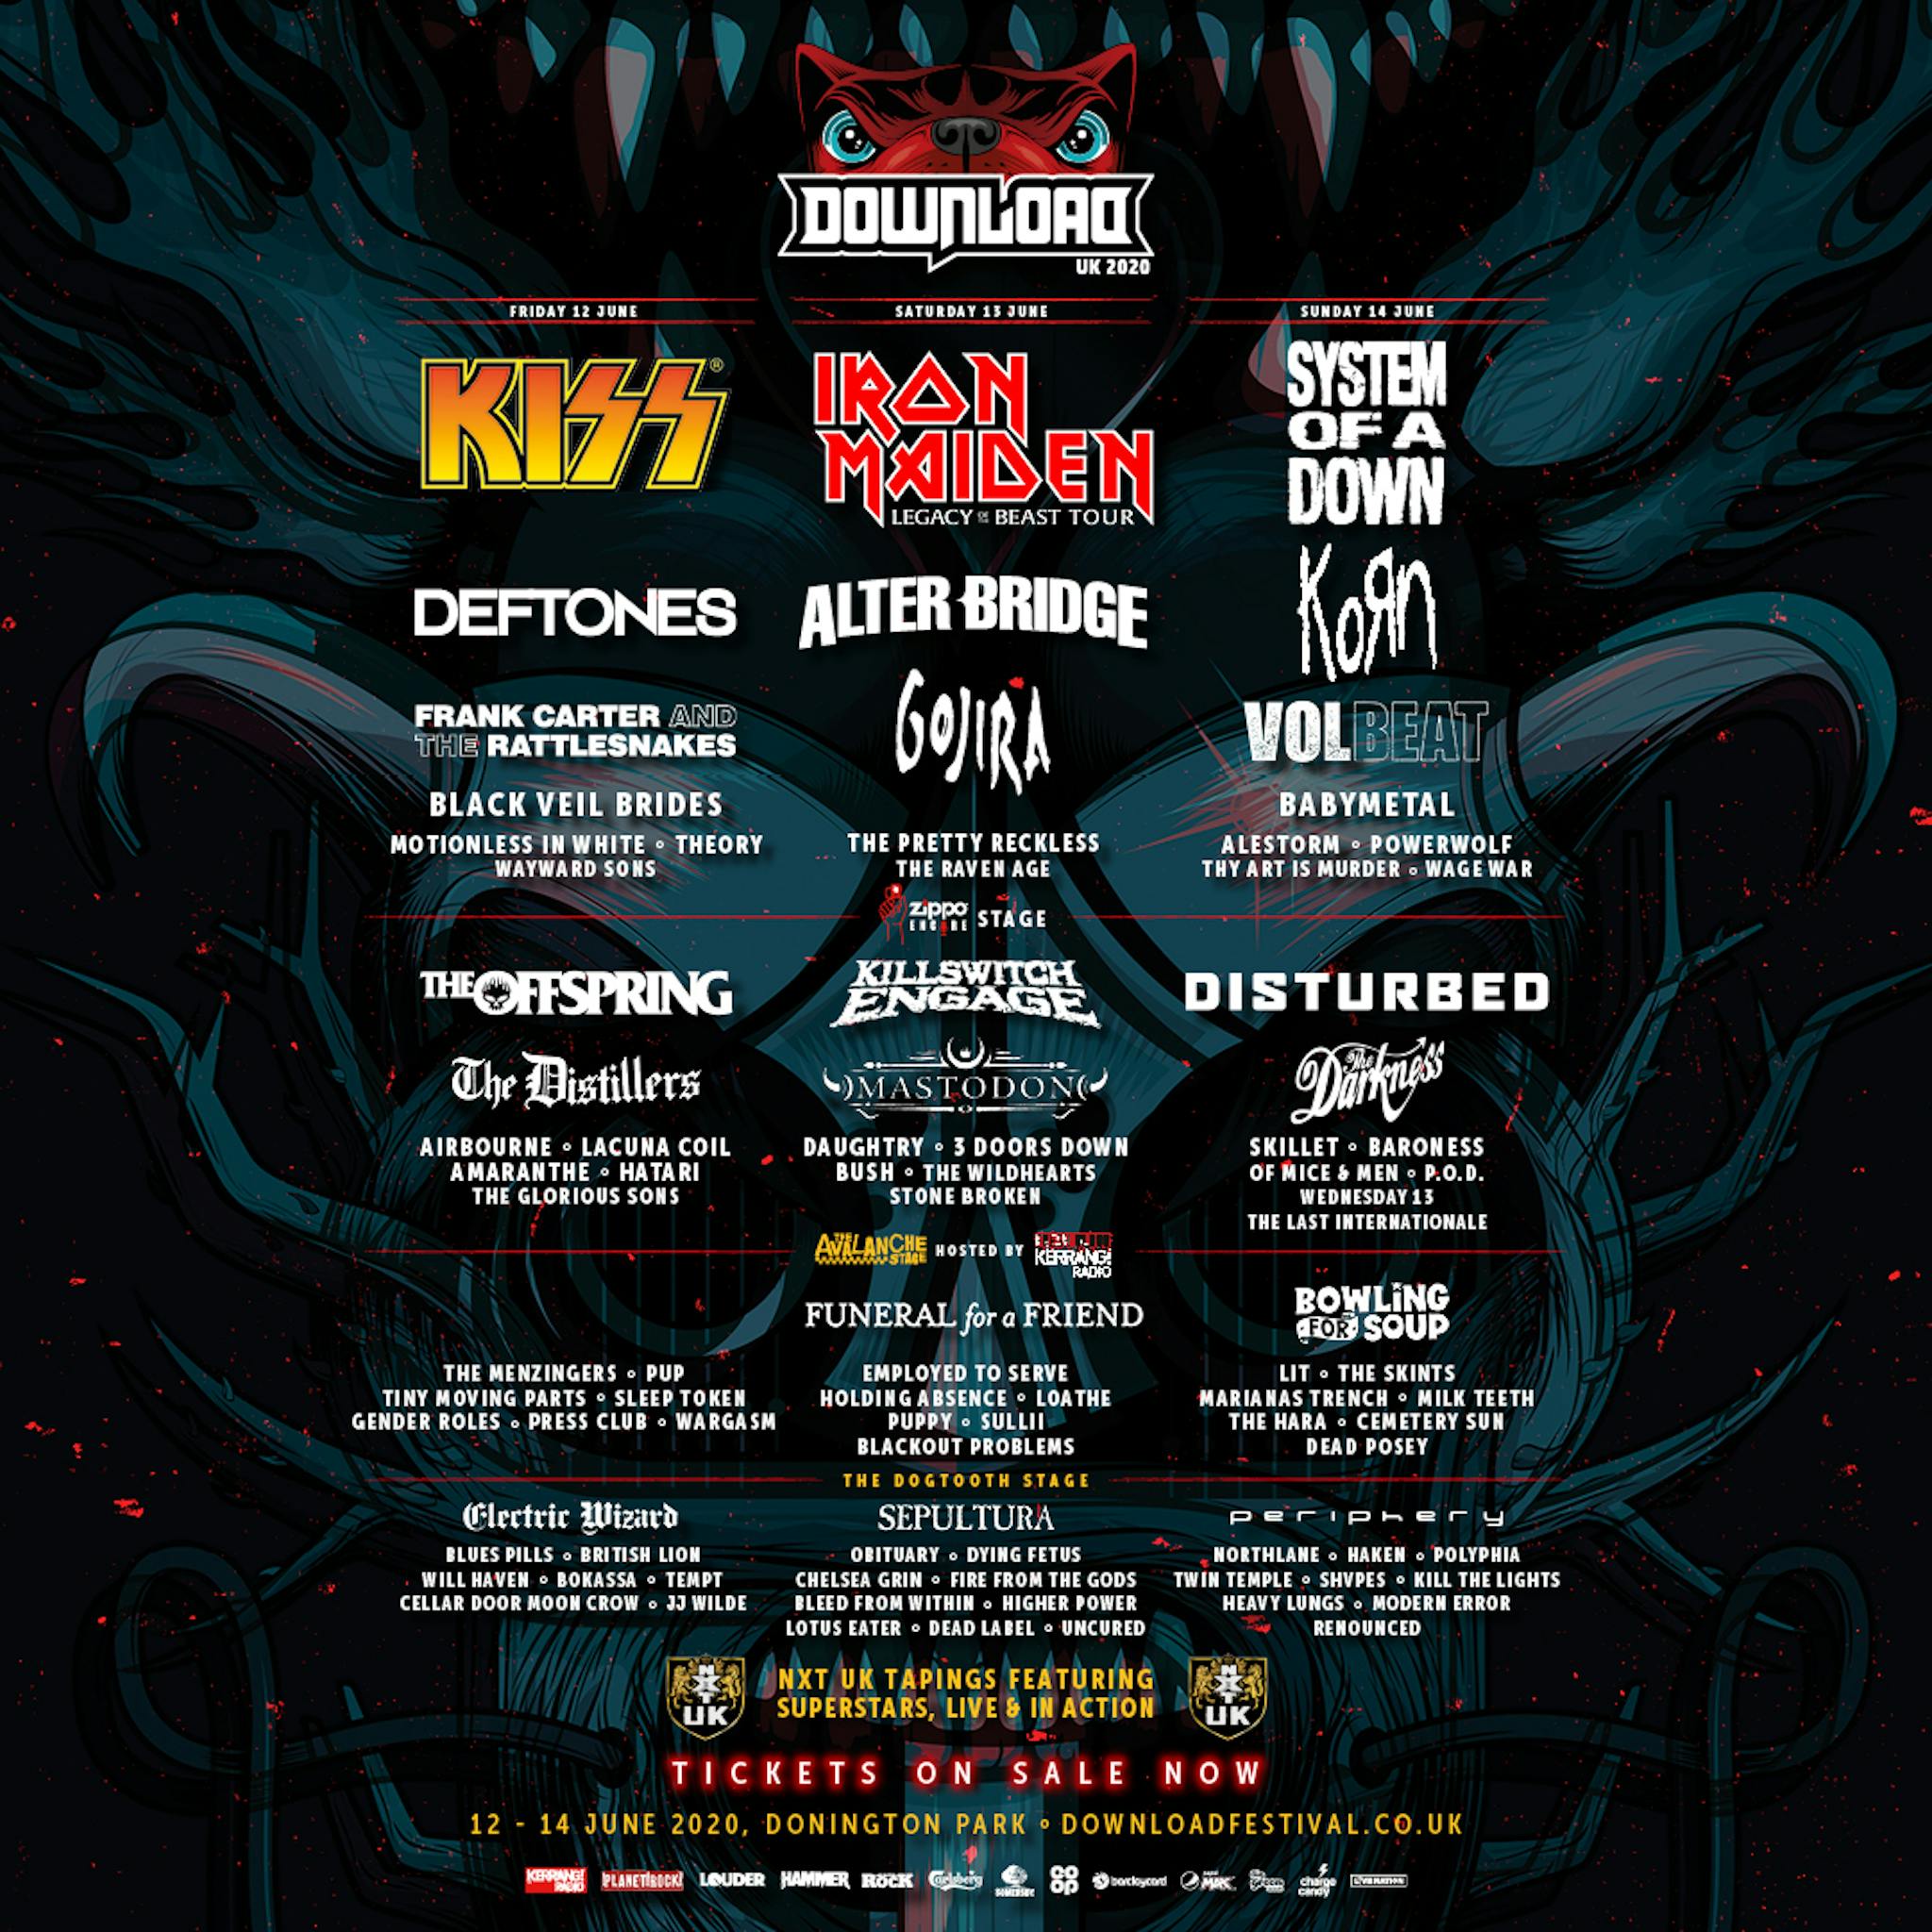 Download Festival 2020 Updated February 1